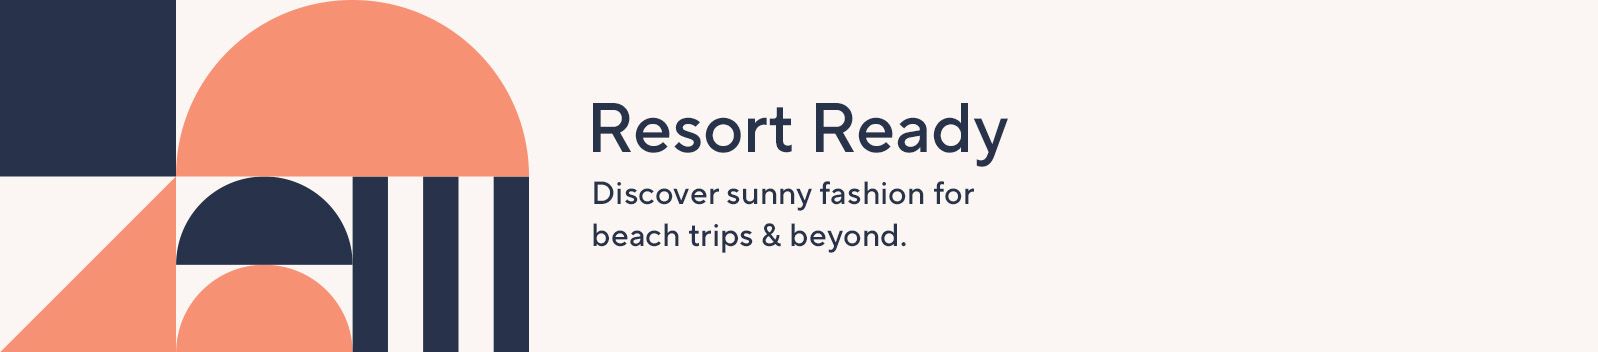 Resort Ready- Discover sunny fashion for beach trips & beyond. 